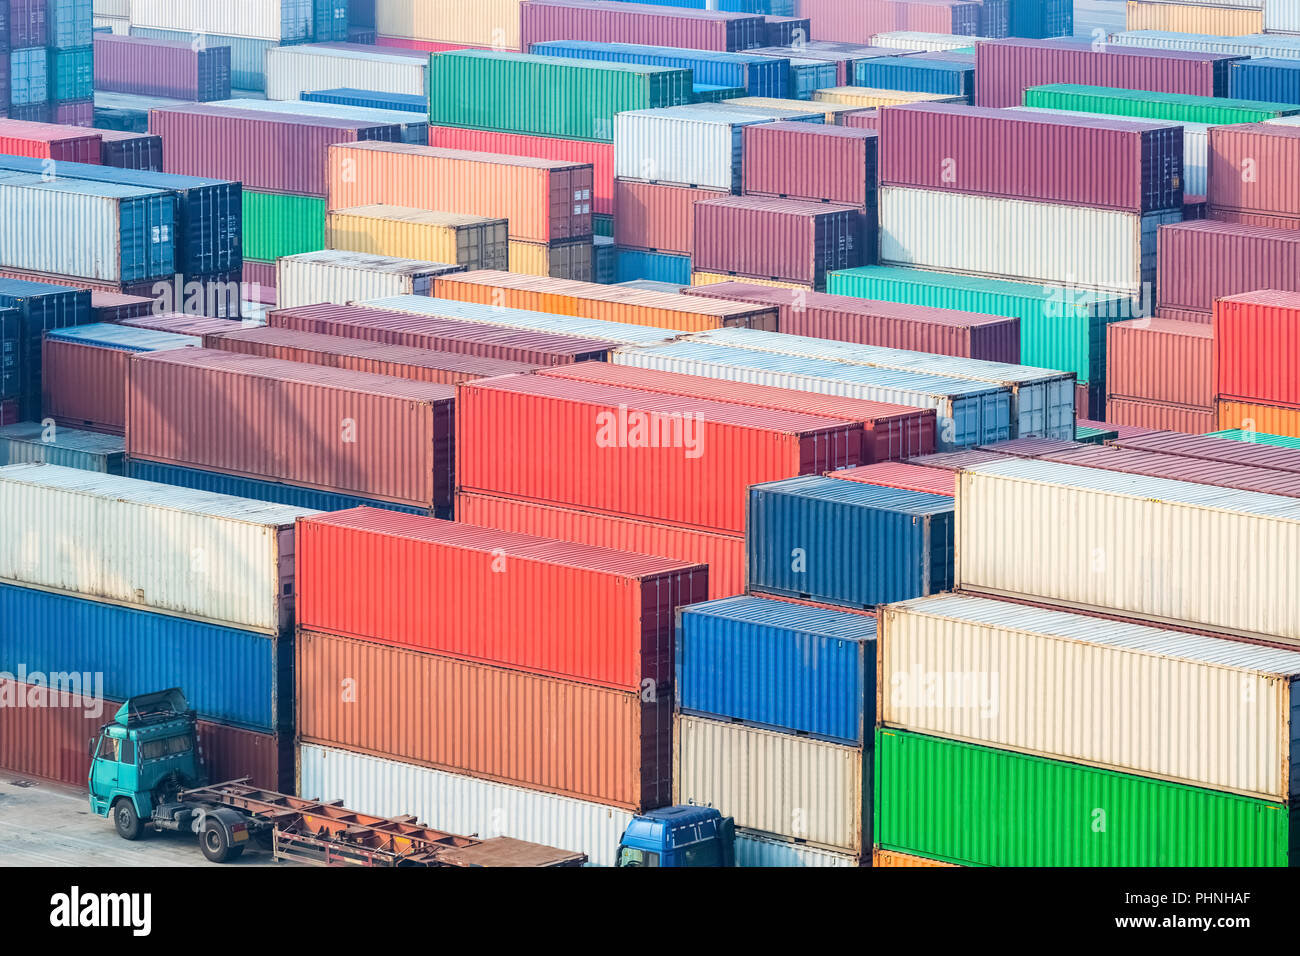 Container Freight Station closeup Stockfoto